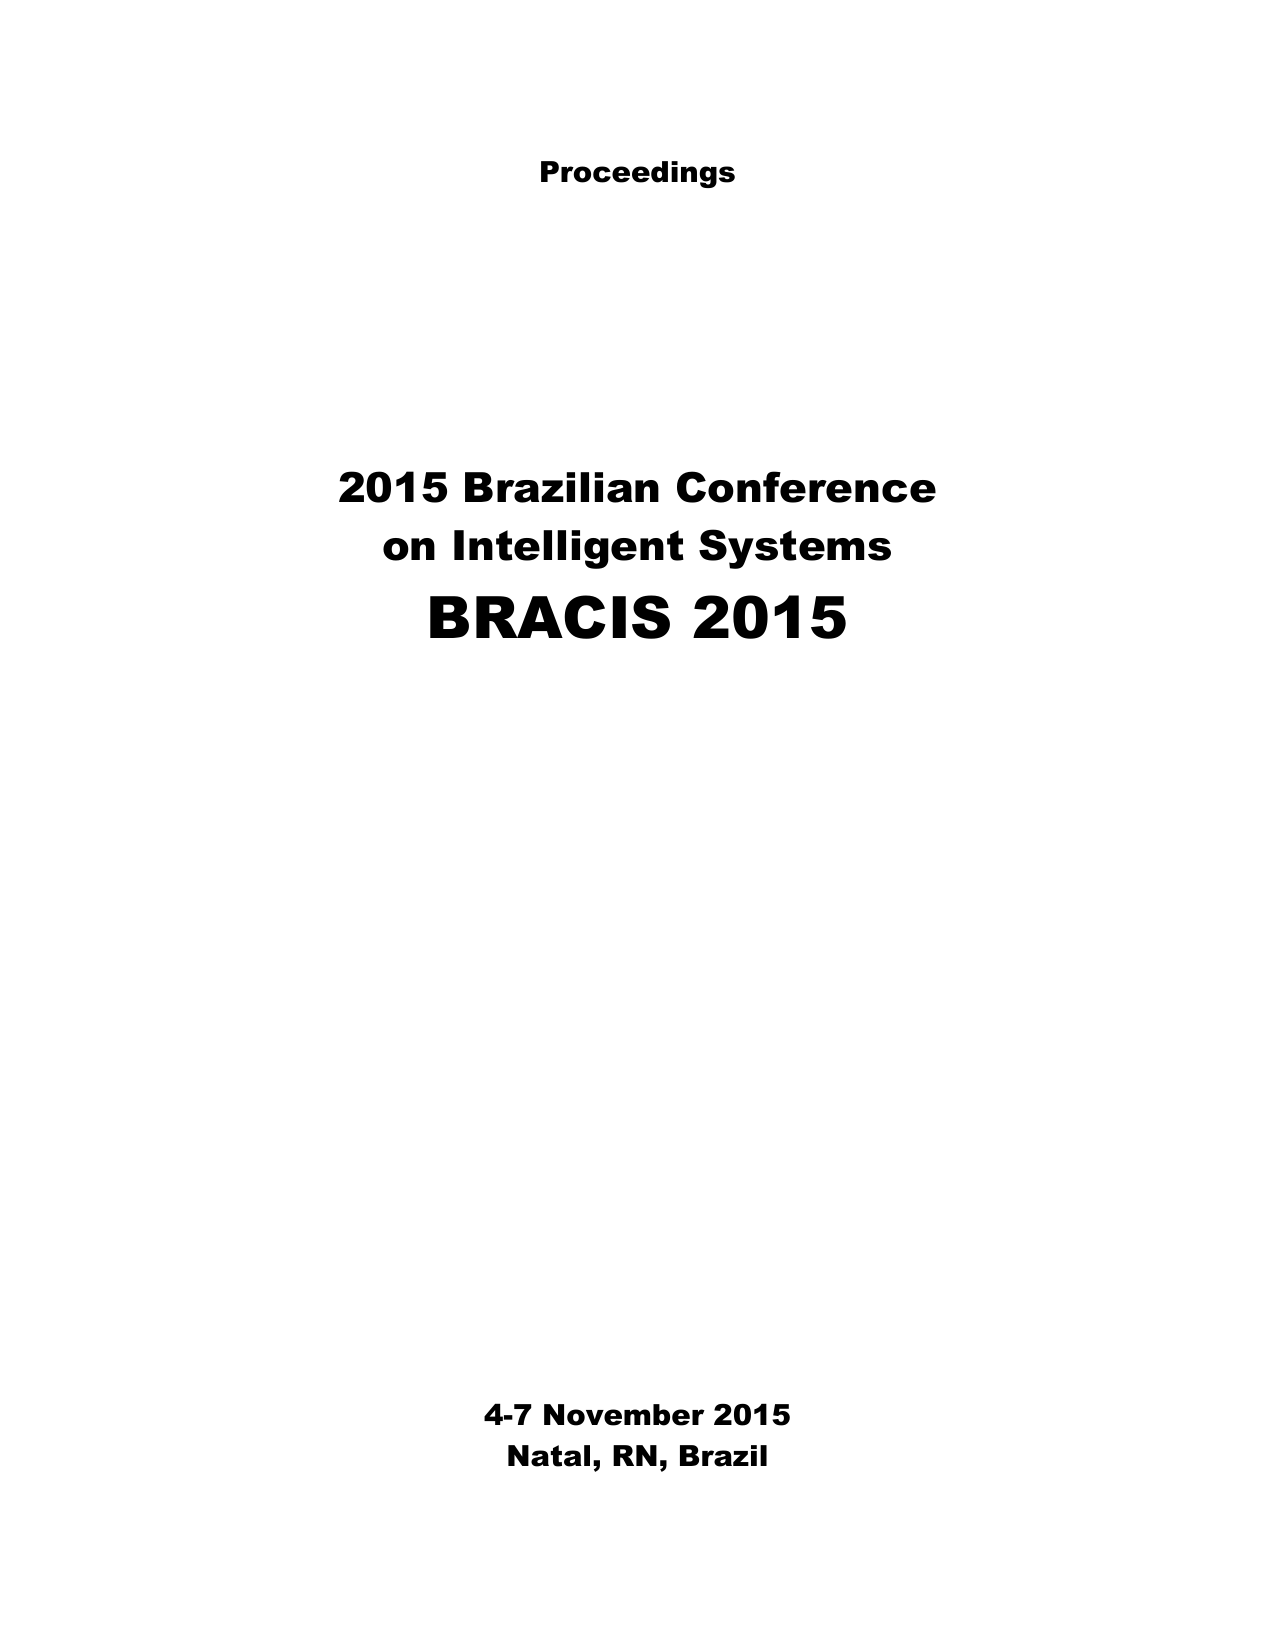 cover_bracis_2015.png